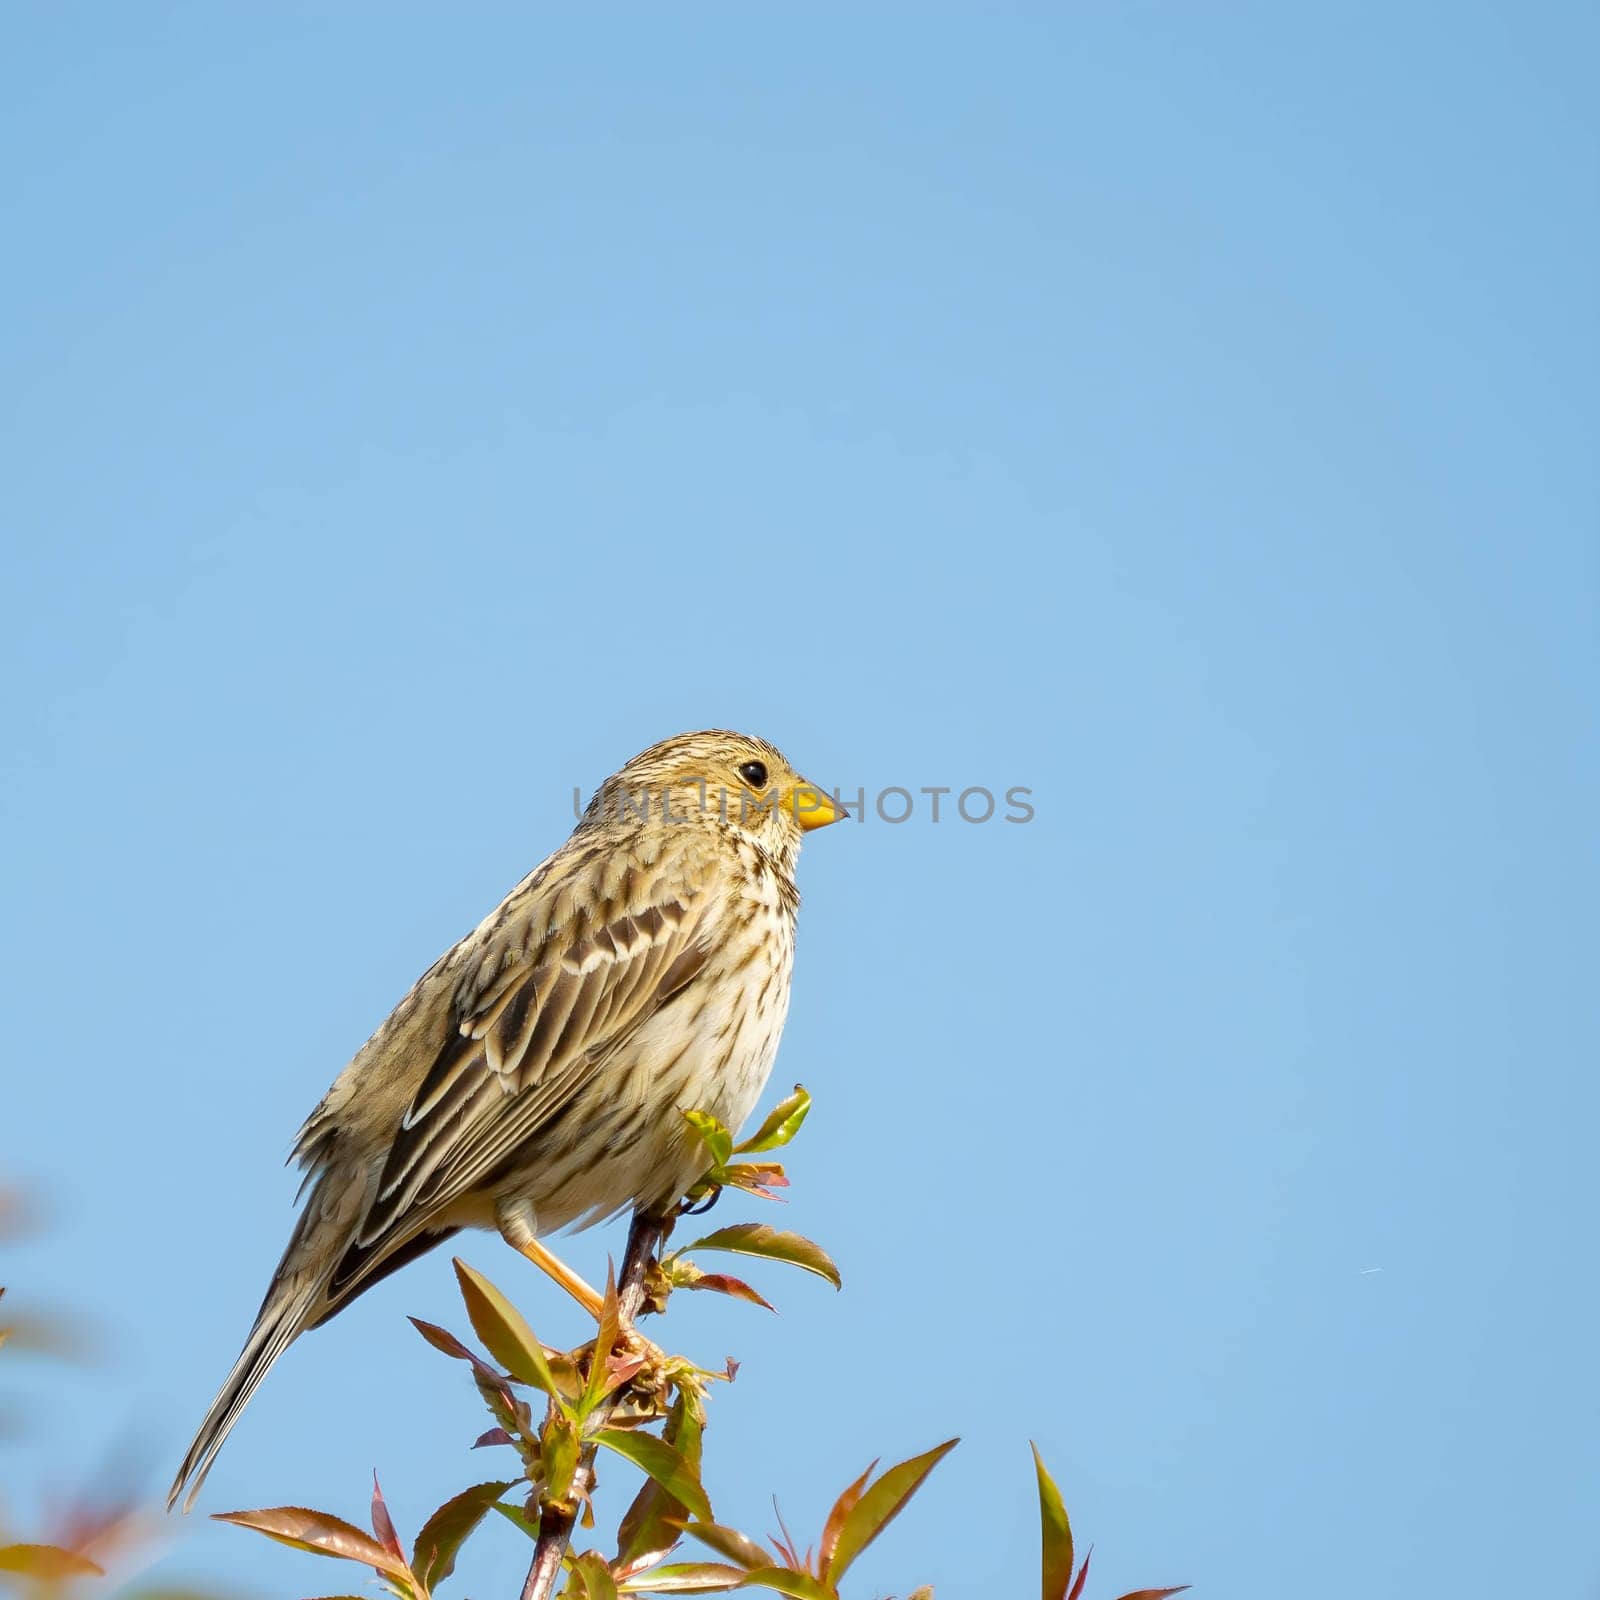 Corn bunting on a twig, close-up photo against the sky. by NatureTron